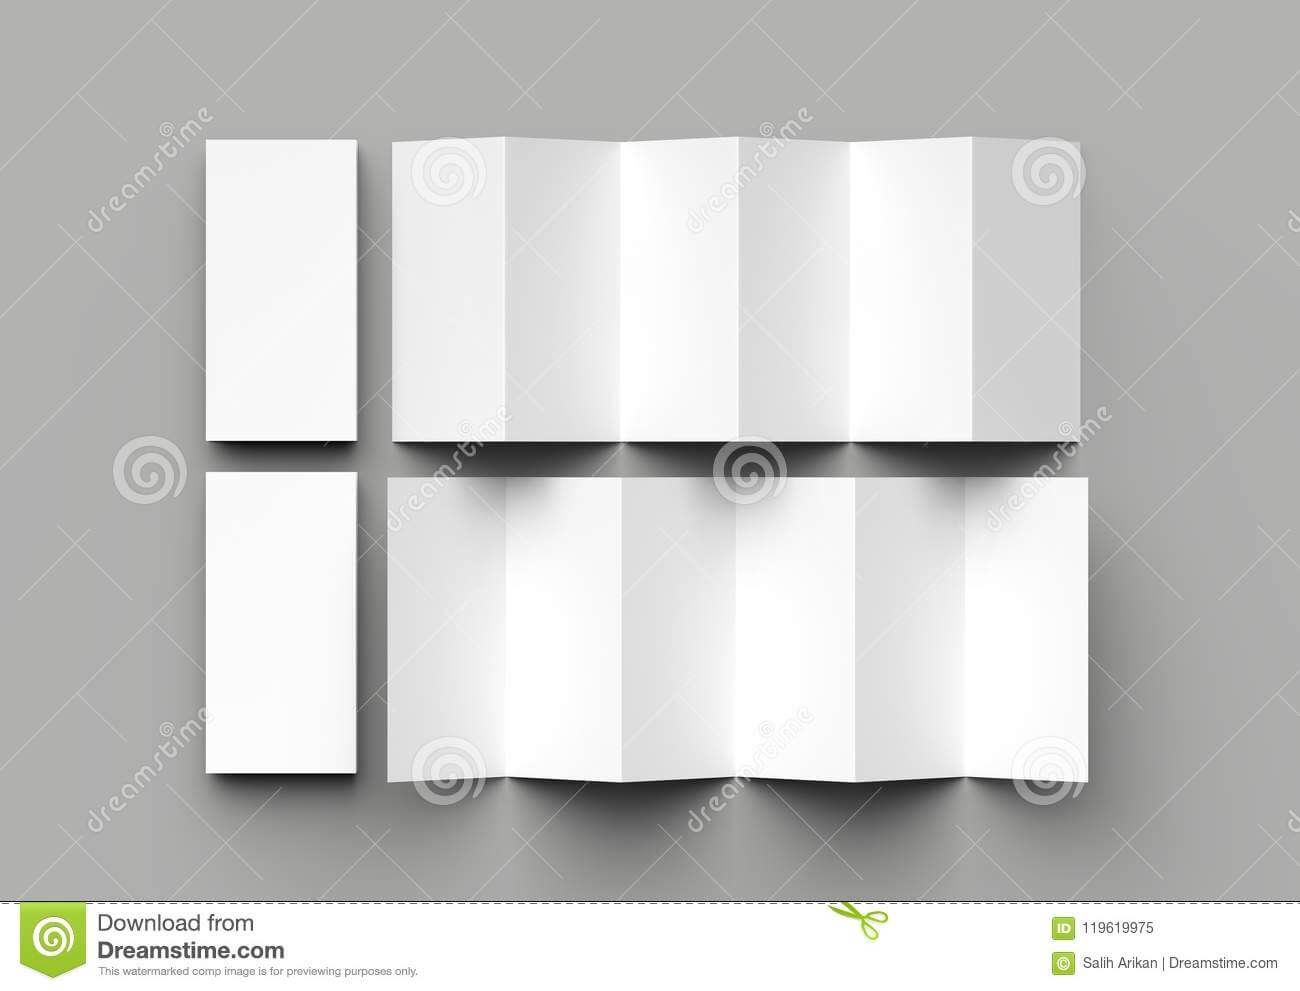 12 Page Leaflet, 6 Panel Accordion Fold - Z Fold Vertical Regarding 12 Page Brochure Template